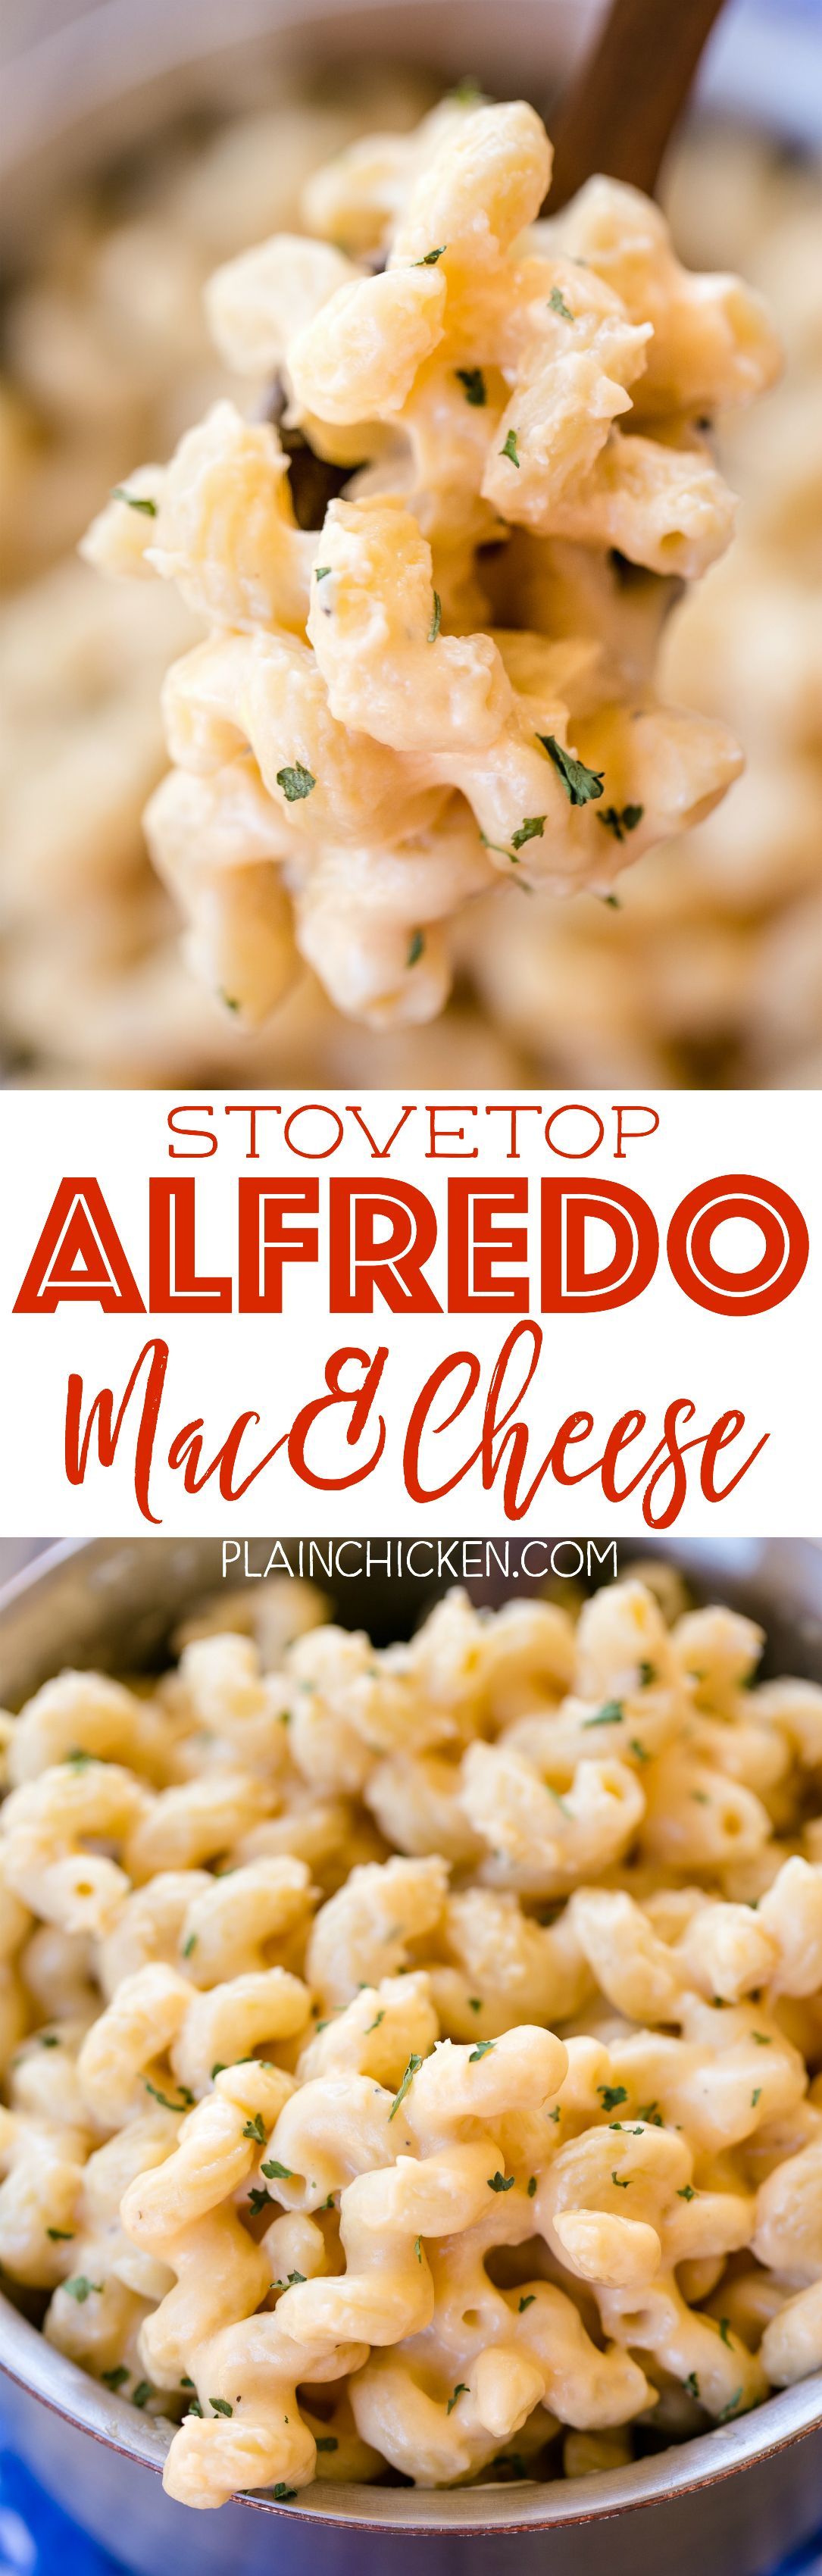 Stovetop Alfredo Mac & Cheese – ready in 10 minutes! We make this all the time! SO easy and SOOOO delicious! Only 5 ingredients!